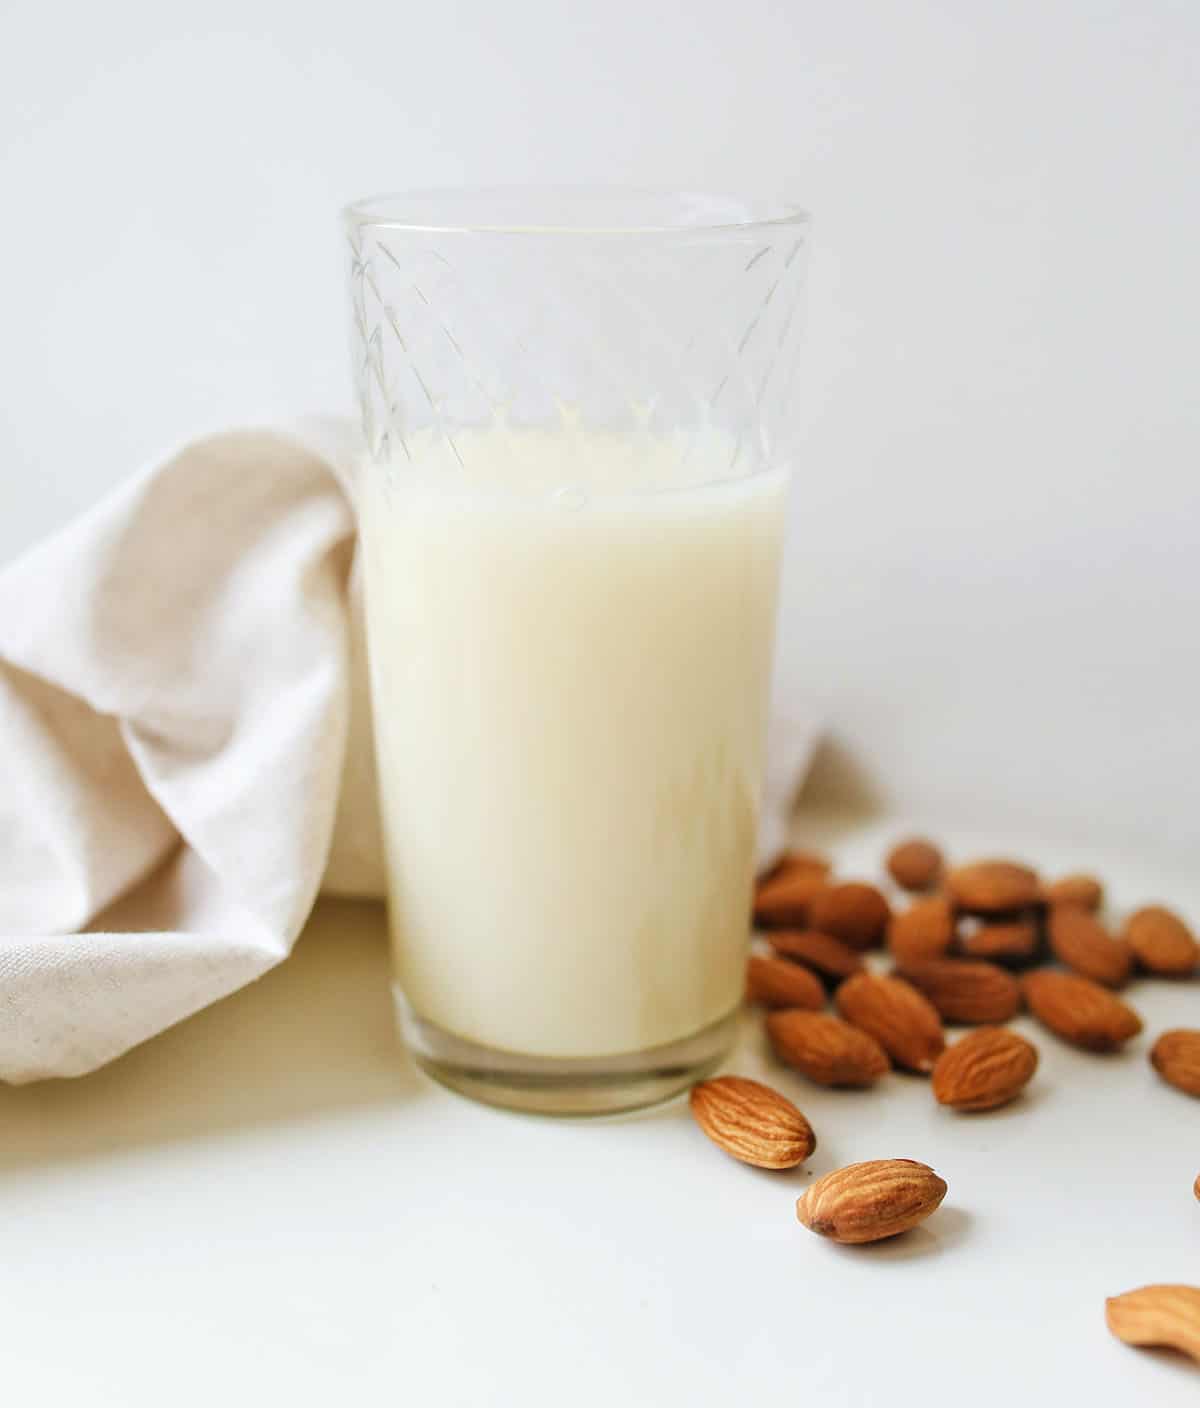 clear glass of almond milk on a white background with a handful of almonds and a white linen - first vegan pantry item